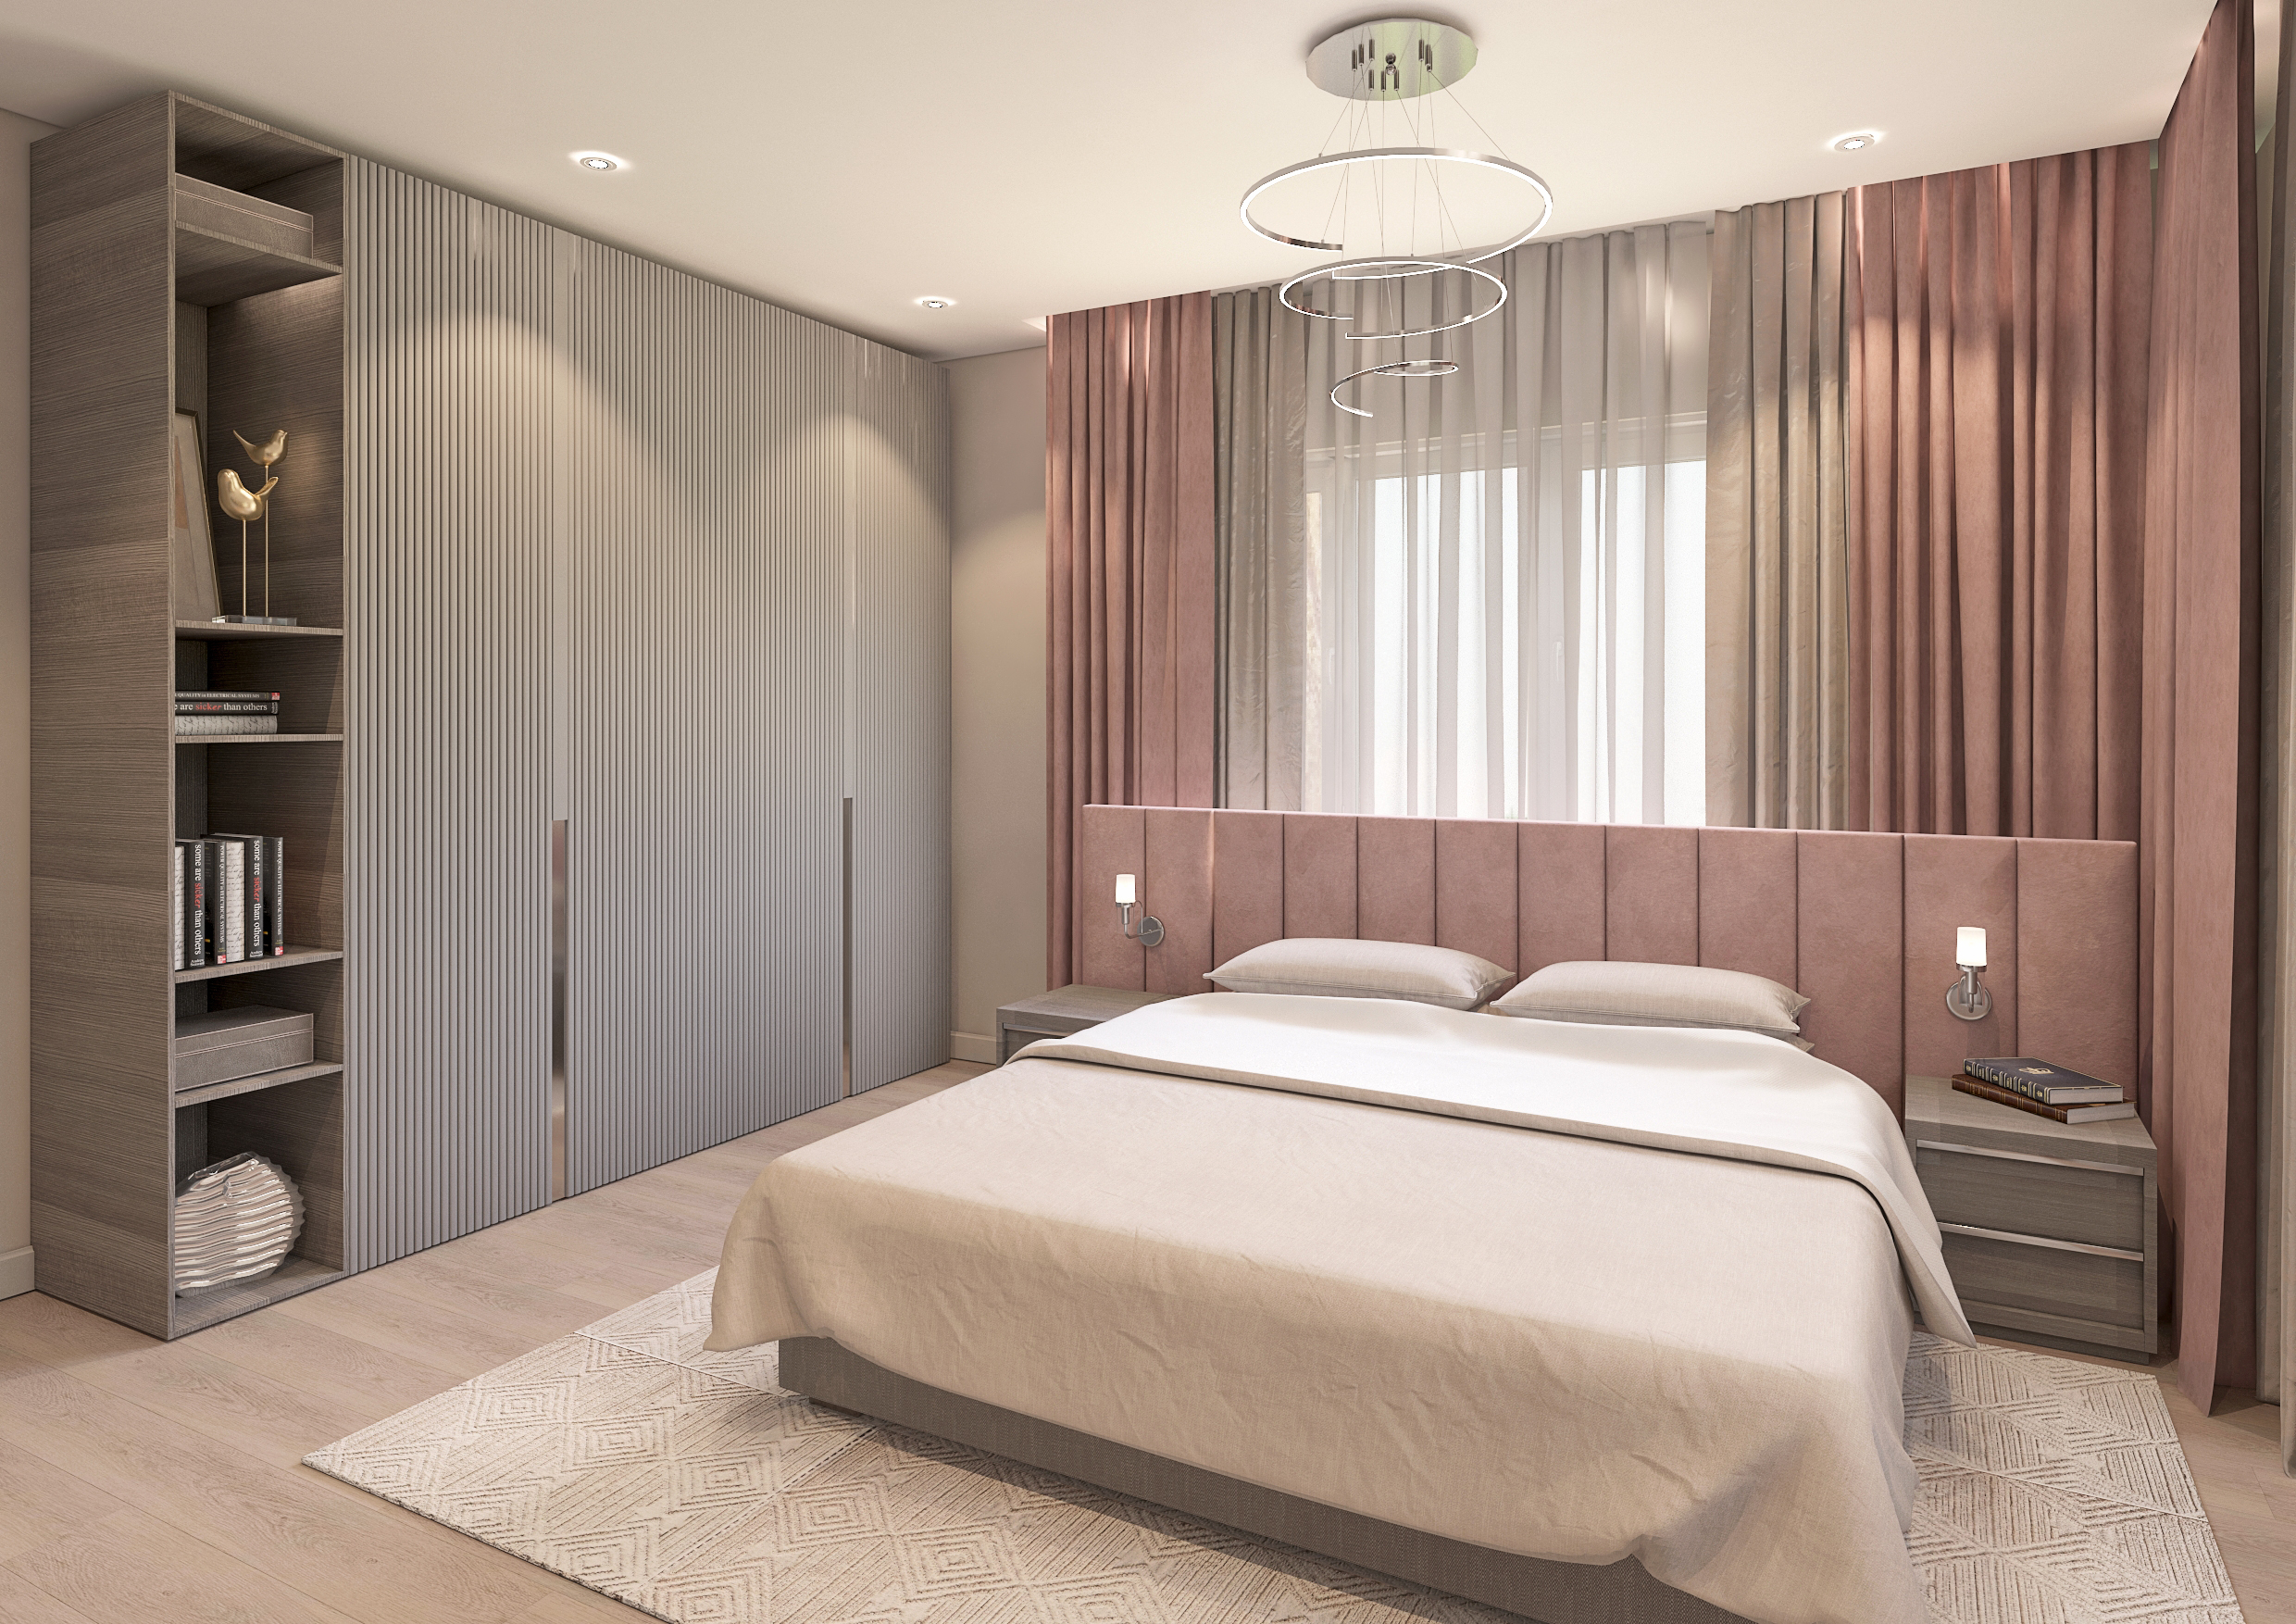 Bedroom in a private house in 3d max vray 3.0 image